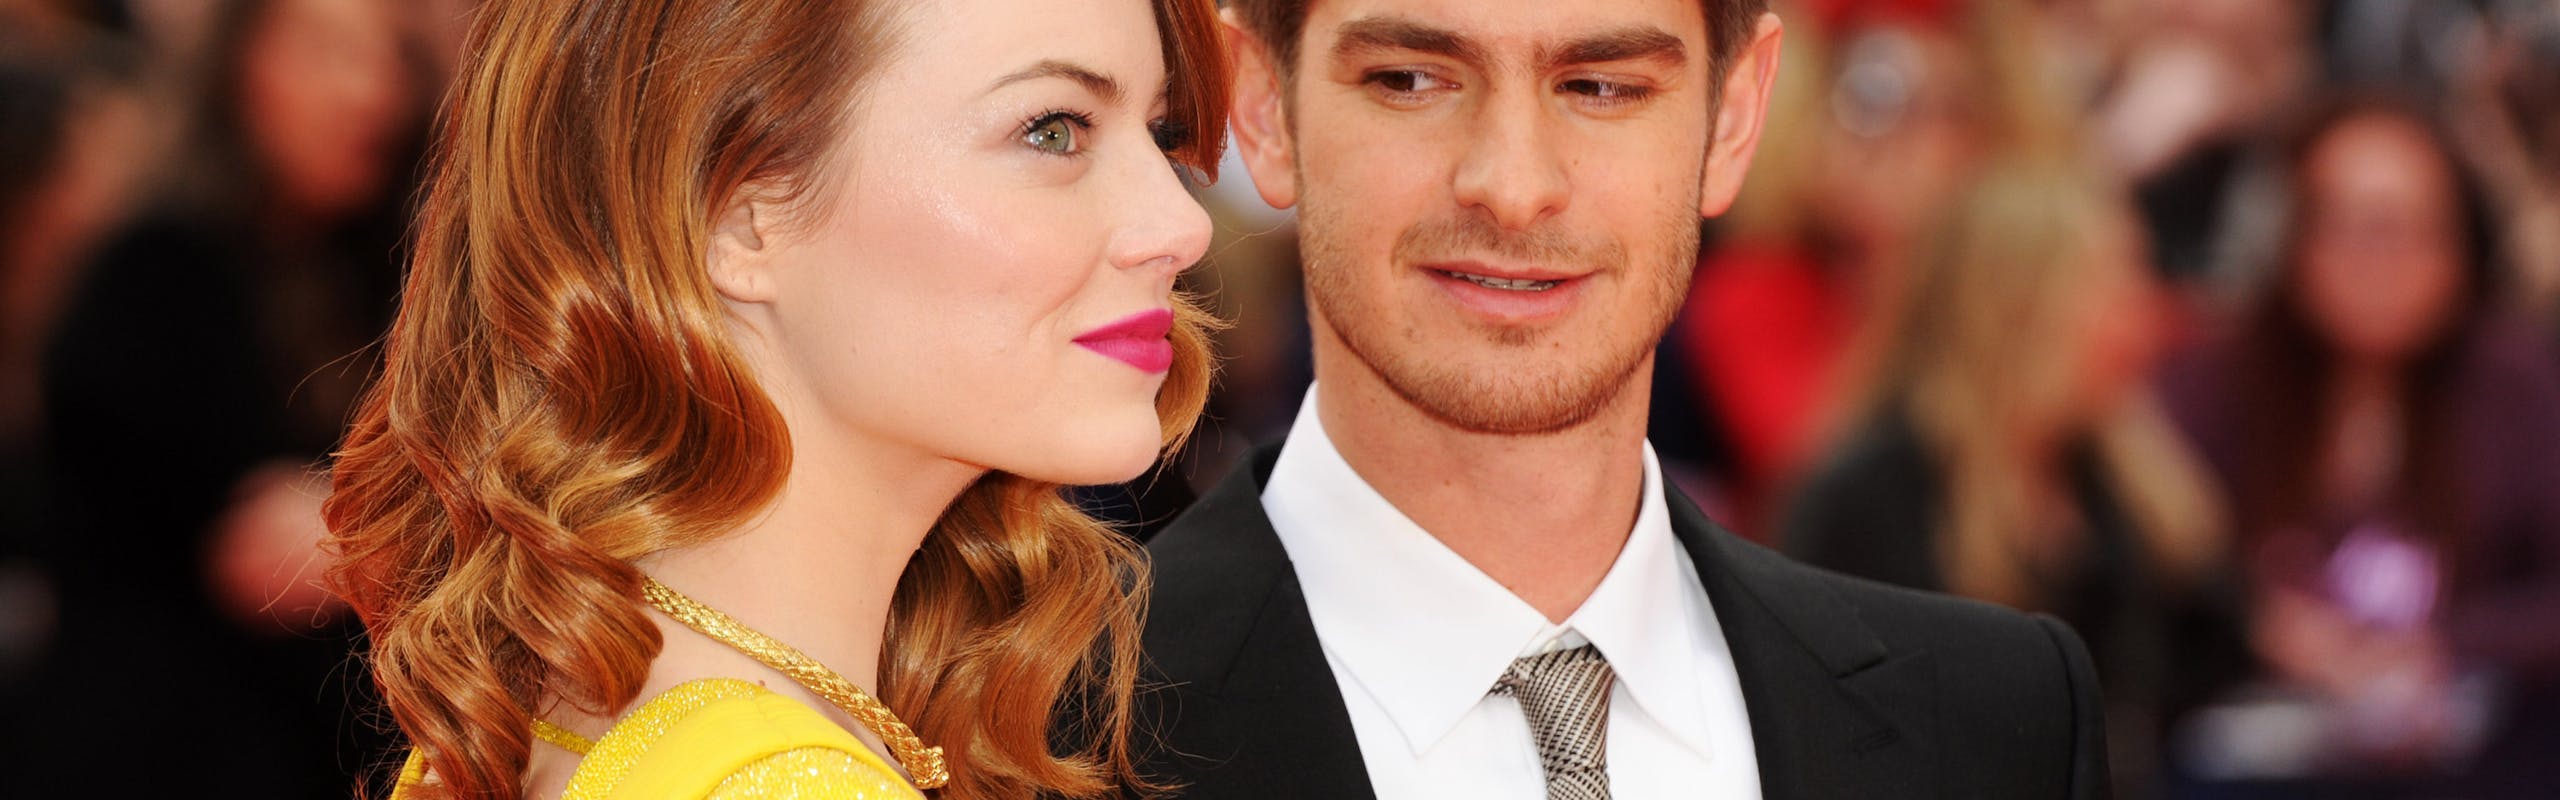 Andrew Garfield in a suit and tie and Emma Stone in a backless yellow dress at the premier of "The Amazing Spiderman 2"